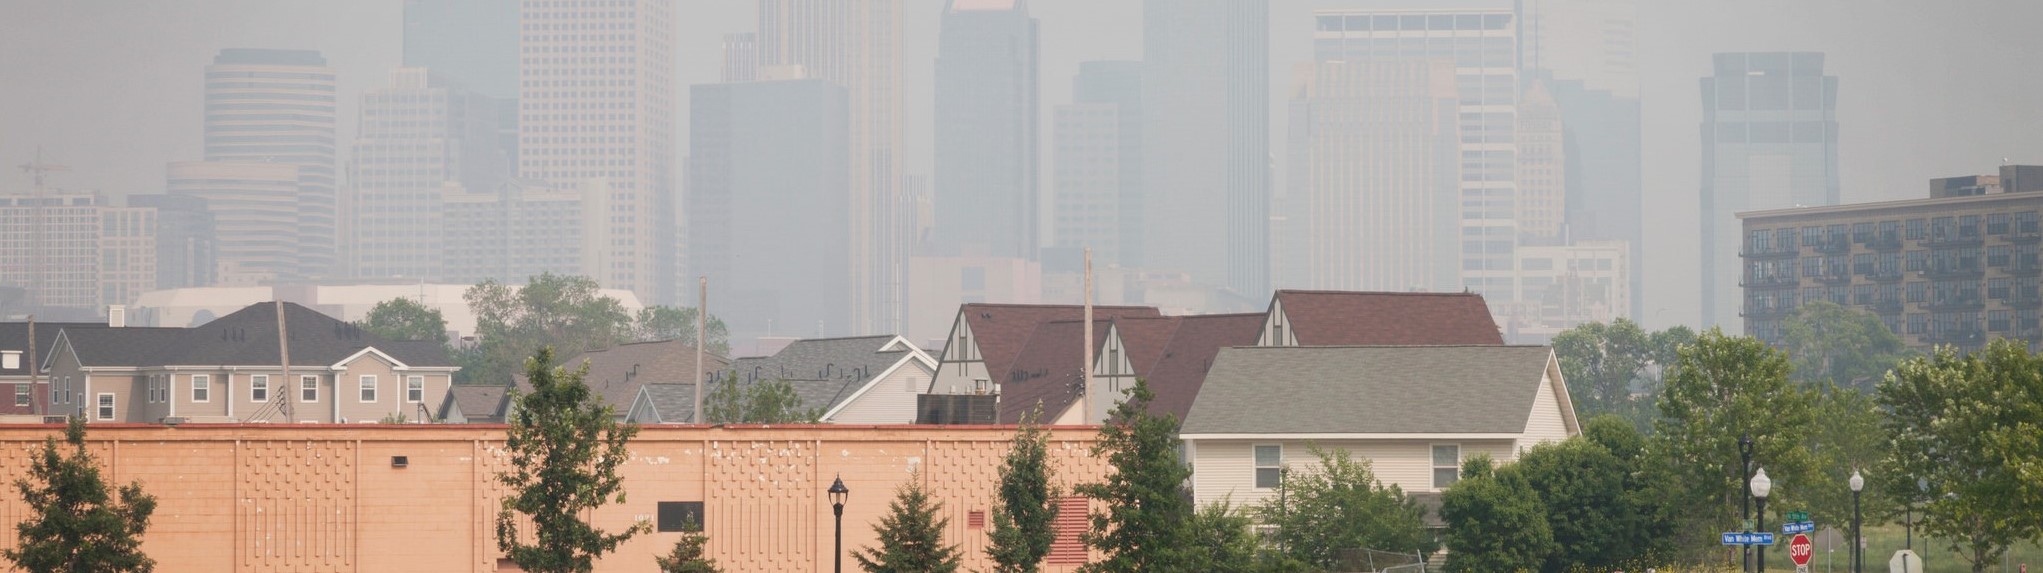 image of cityscape with particulate matter